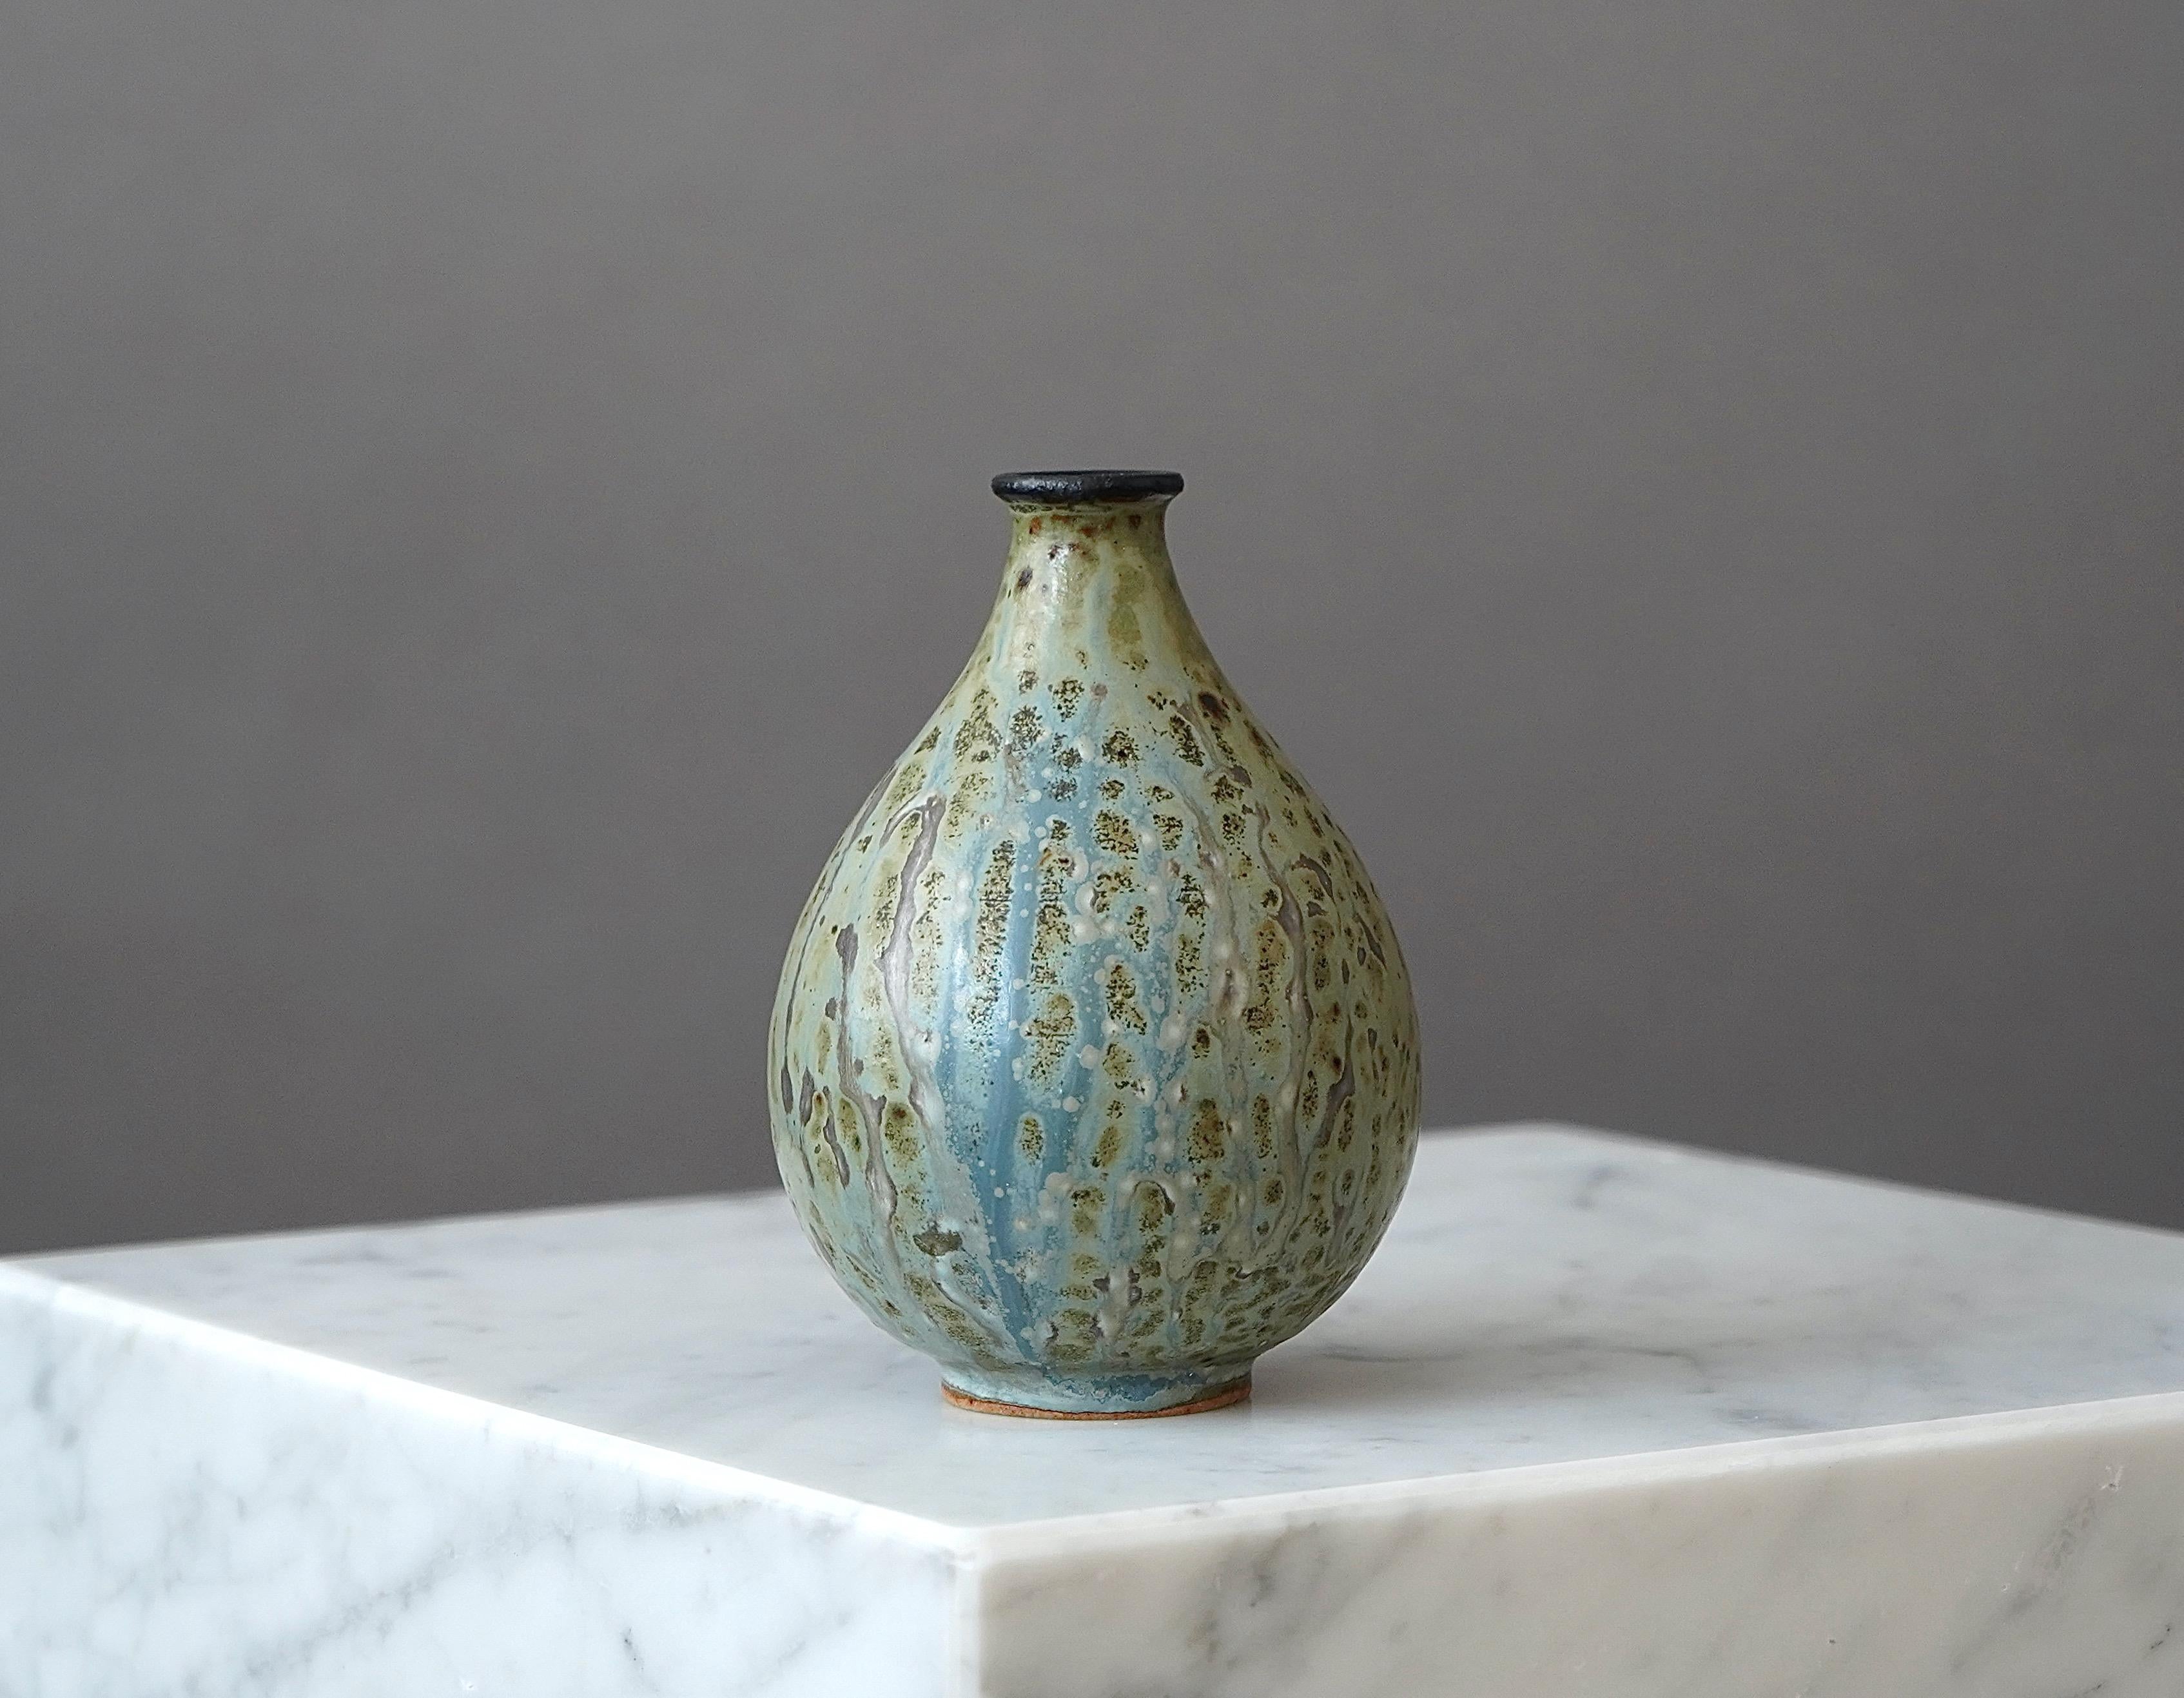 A beautiful and early stoneware Vase with amazing glaze.
Made by Arne Bang, at Holmegaard Stentoj studio, Denmark.

Excellent condition. Marked 